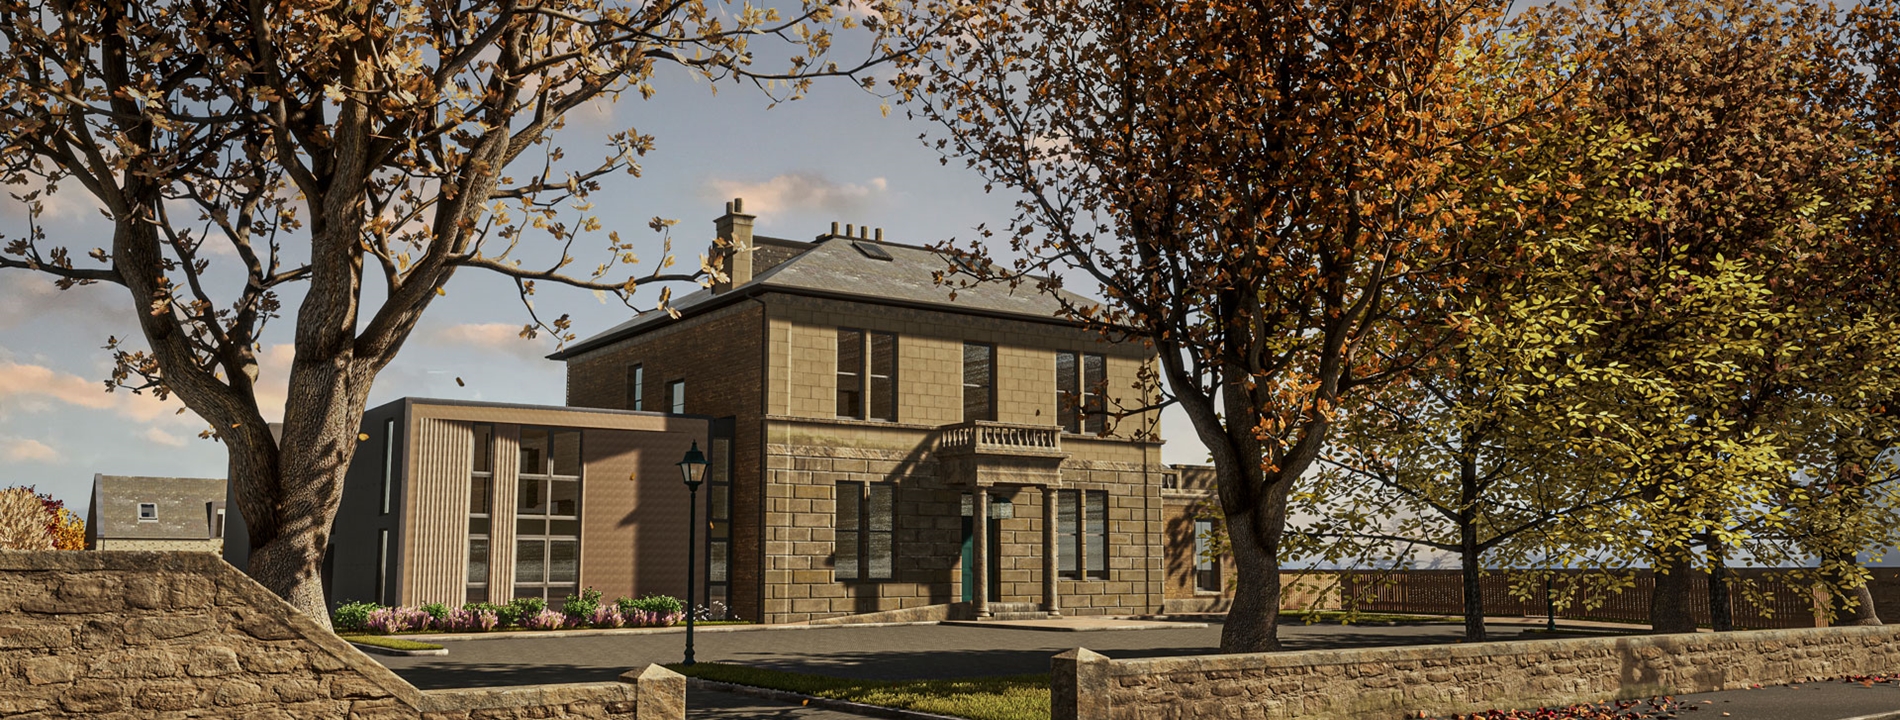 A render image showing Strathdoon House from the road, with autumn trees in the foreground.